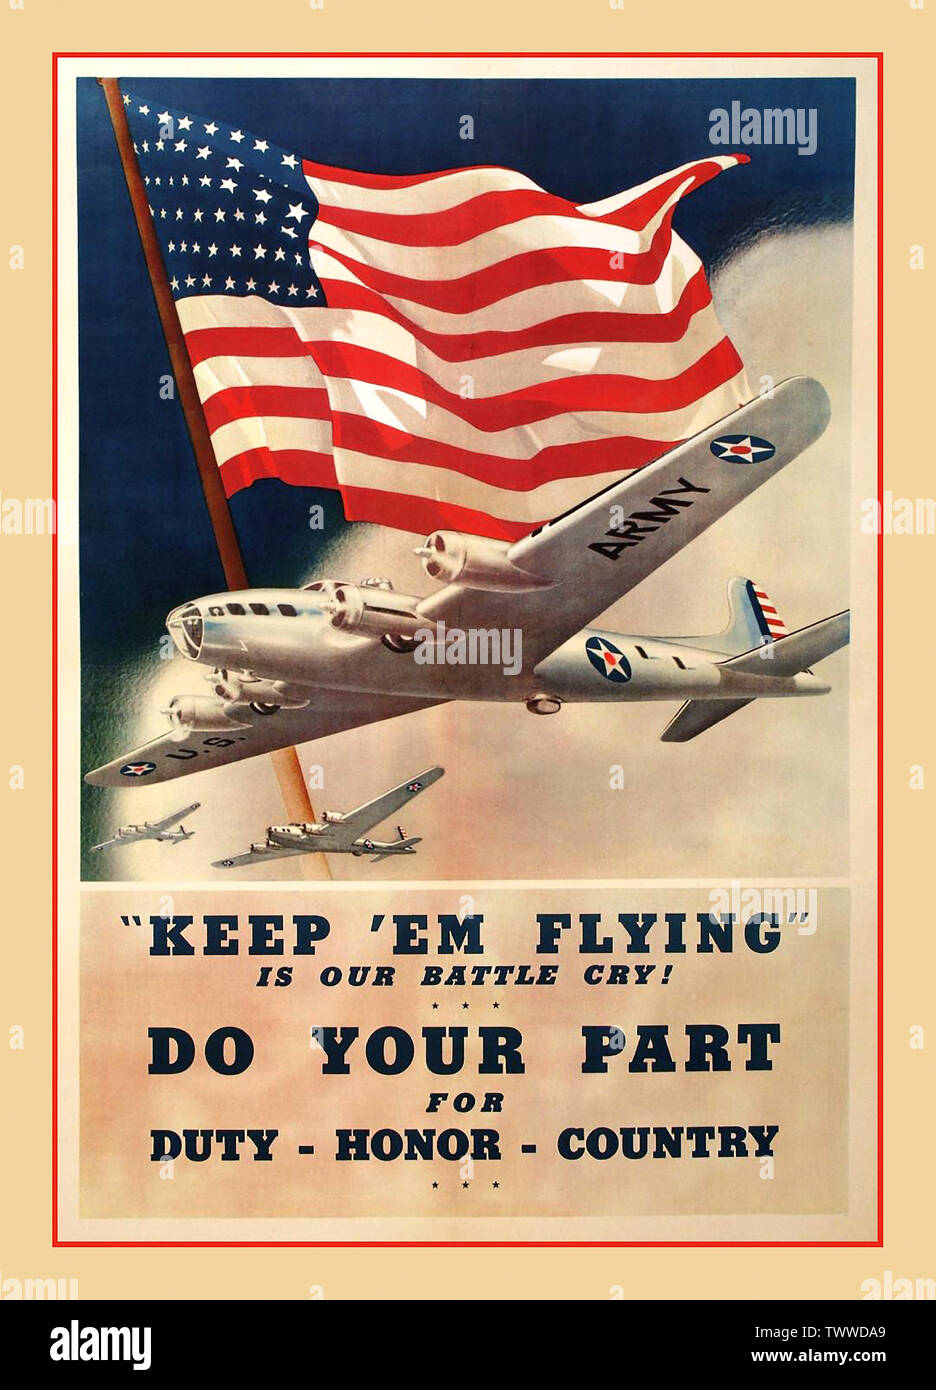 Vintage American WW2 Propaganda Poster “ Keep ‘Em Flying Is Our Battle Cry”  a 1942 World War II patriotic American propaganda poster by artist team, Dan Smith and Albro Downe. The poster features a color image of the B-17 Flying Fortress by Boeing set in front of a large waving American flag. 'Duty, Honor, Country' as an appeal to the American public to support the war effort. The United States Army Air Corps (USAAC) was the military aviation arm of the US Army between 1926 and 1941. During World War II the Corps became the United States Army Air Forces Second World War World War II Stock Photo